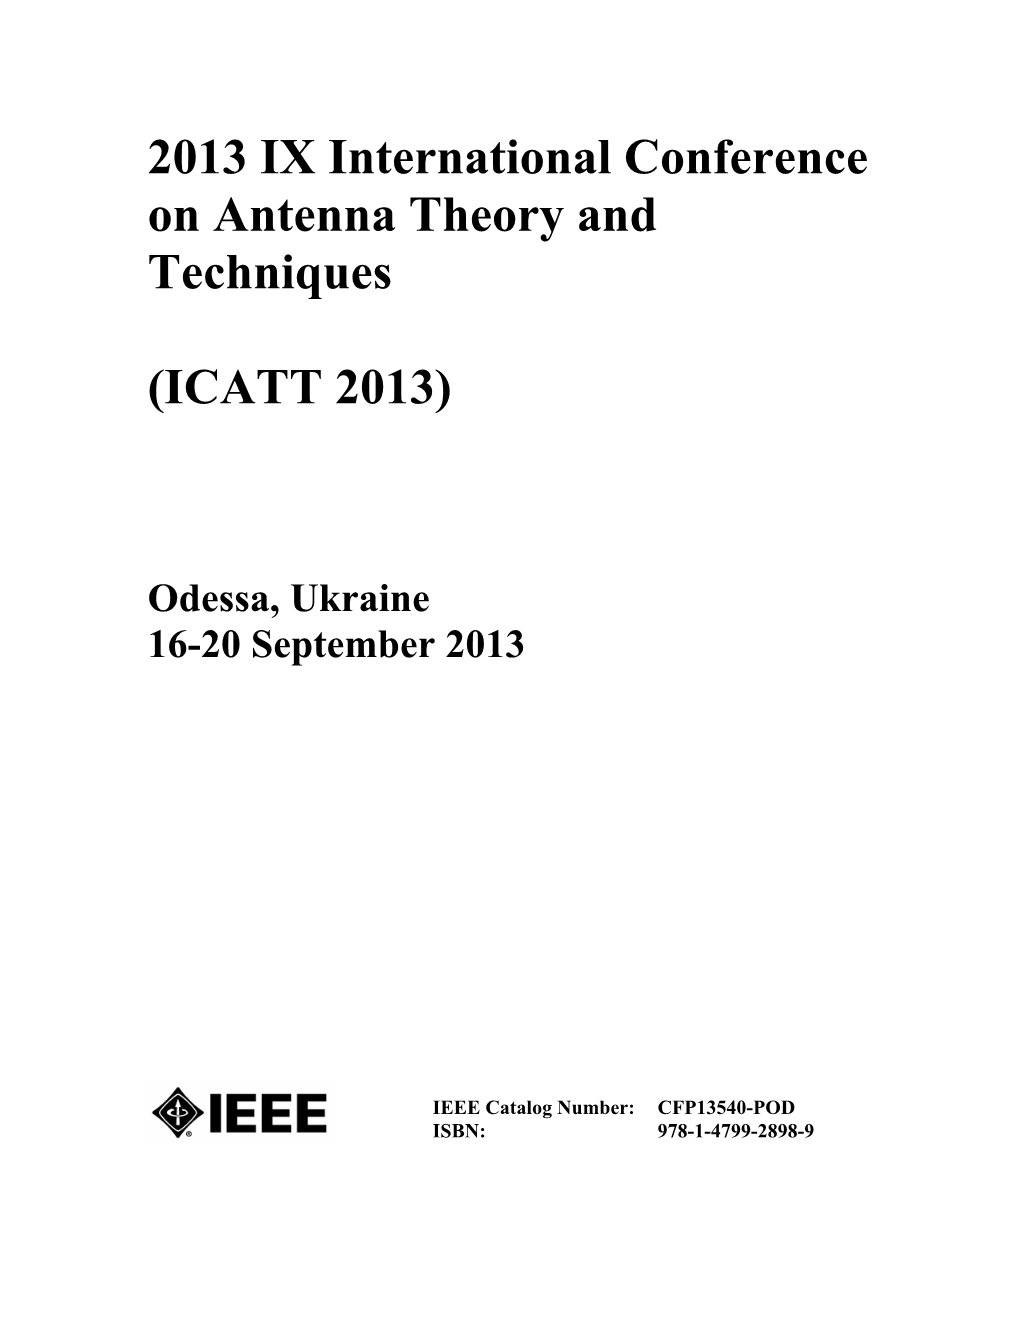 2013 IX International Conference on Antenna Theory and Techniques